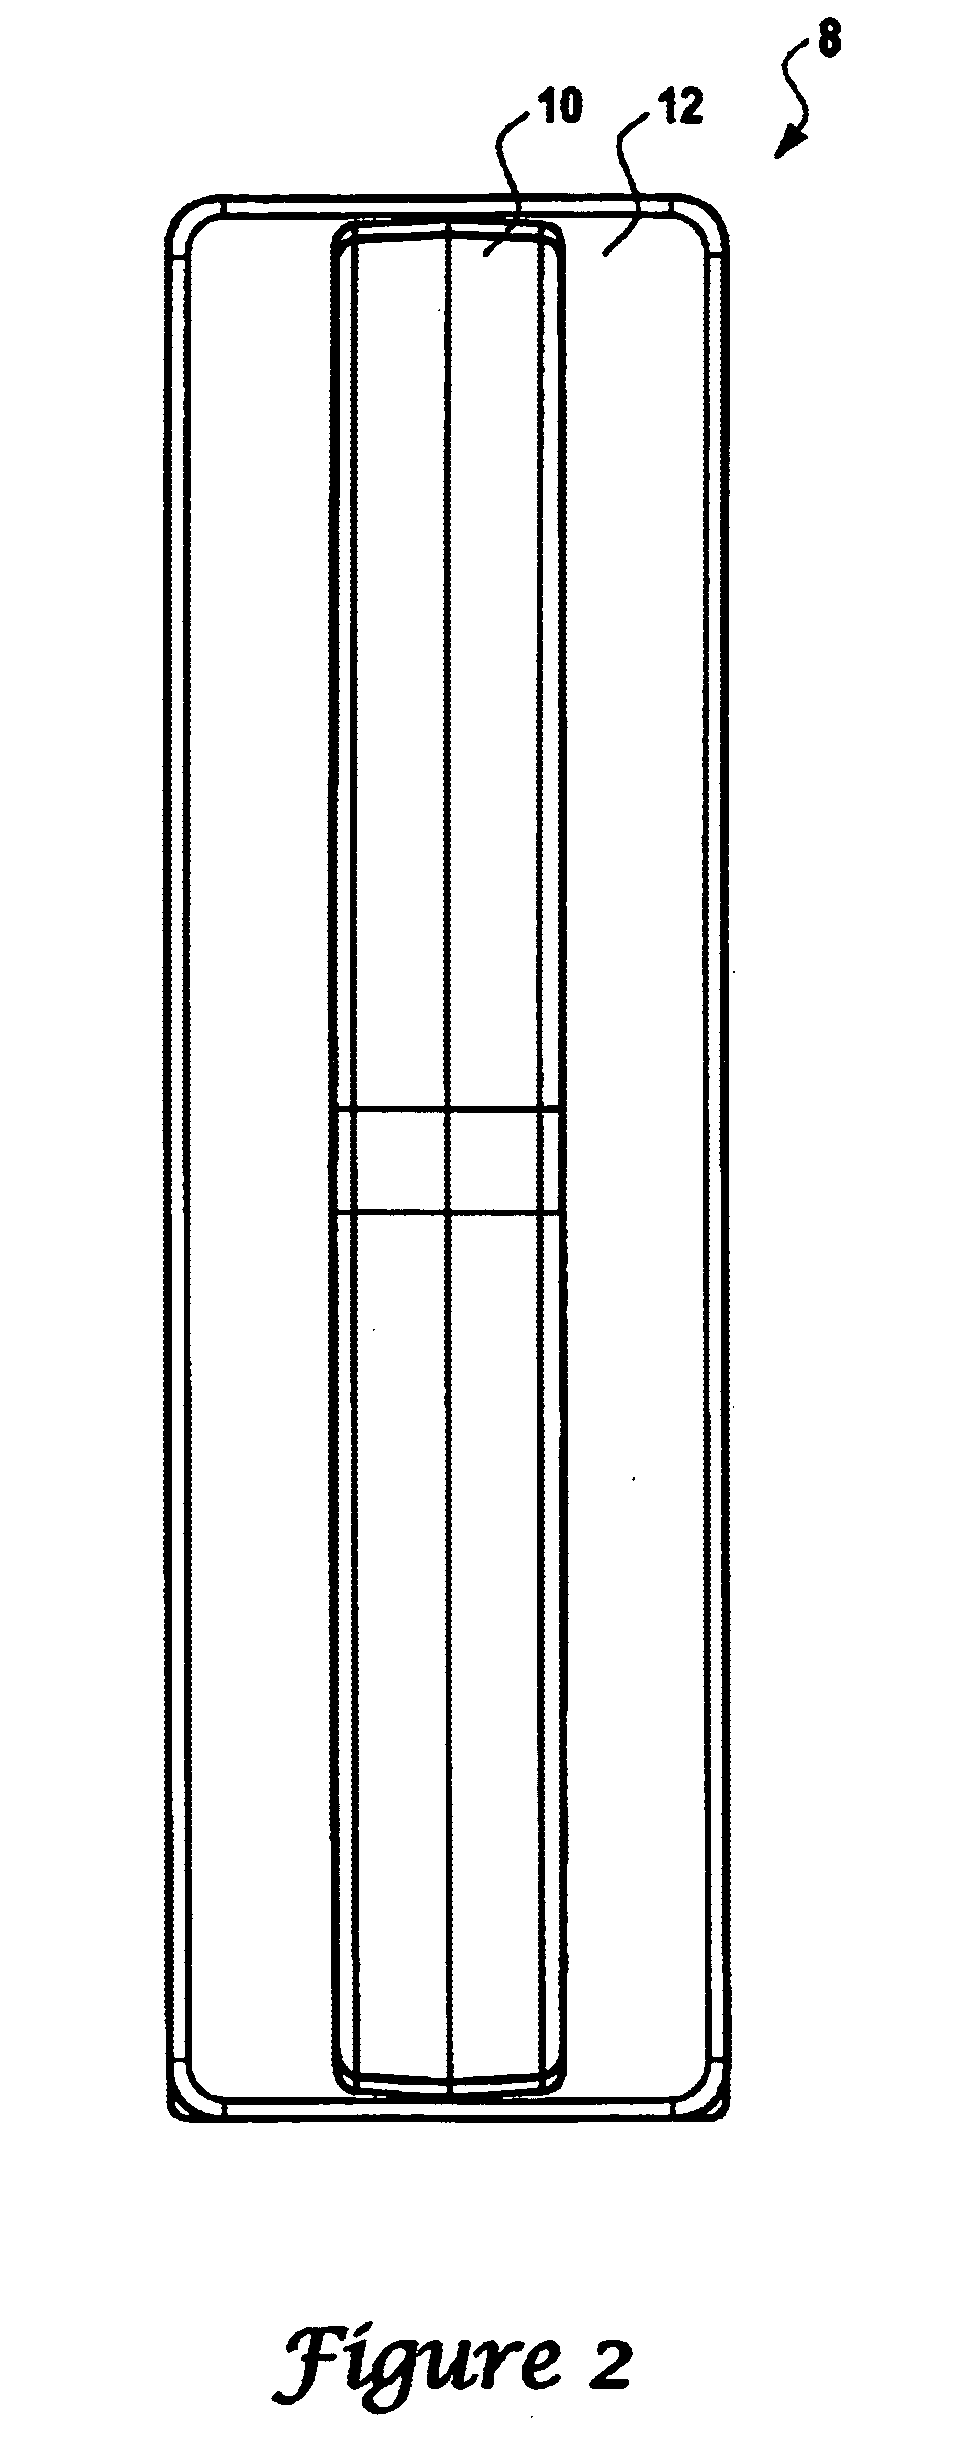 Method and apparatus for cutting materials